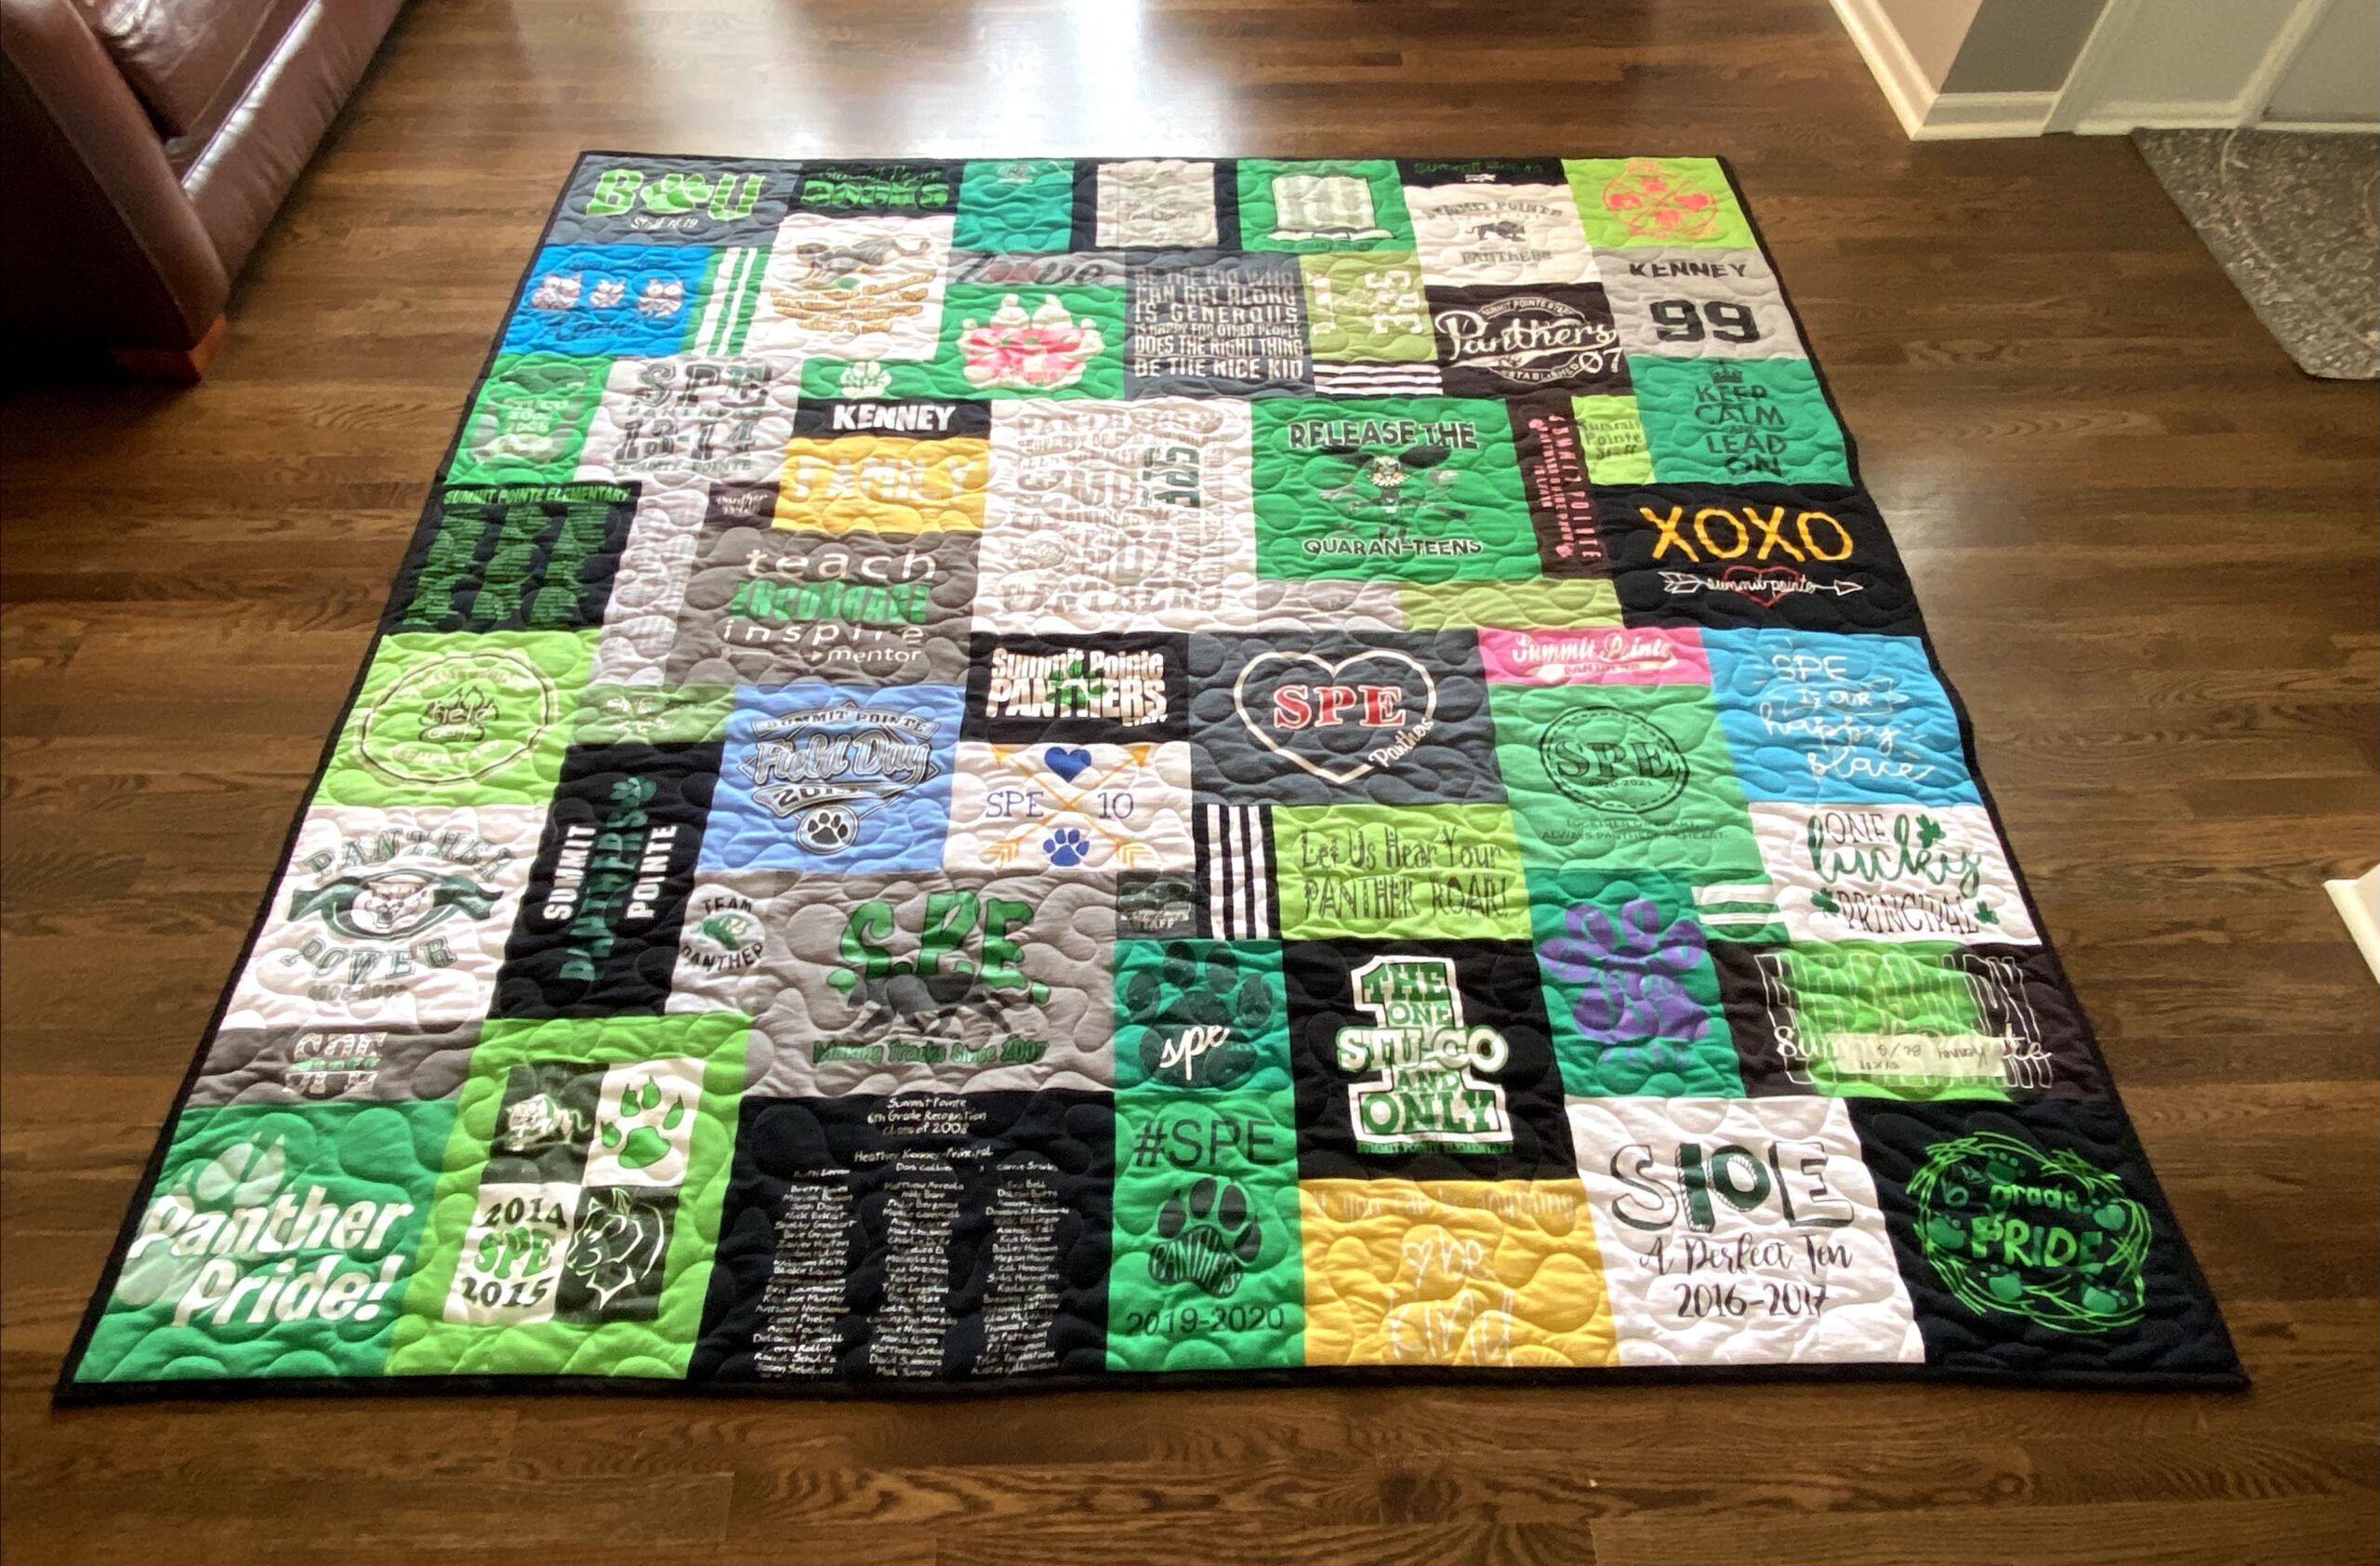 A quilt made out of shirts on the floor